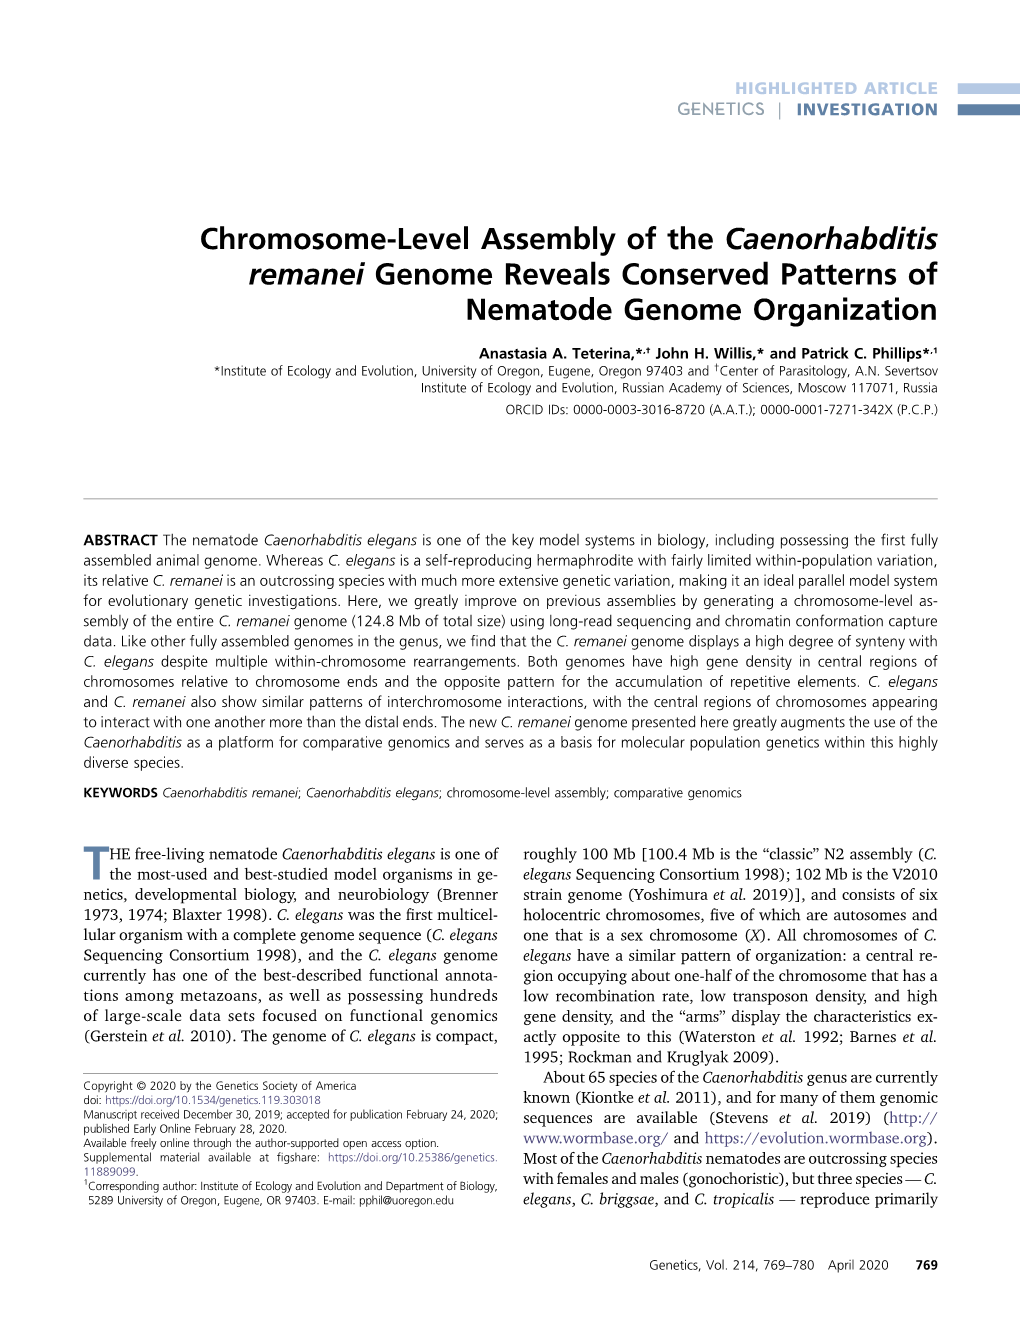 Chromosome-Level Assembly of the Caenorhabditis Remanei Genome Reveals Conserved Patterns of Nematode Genome Organization